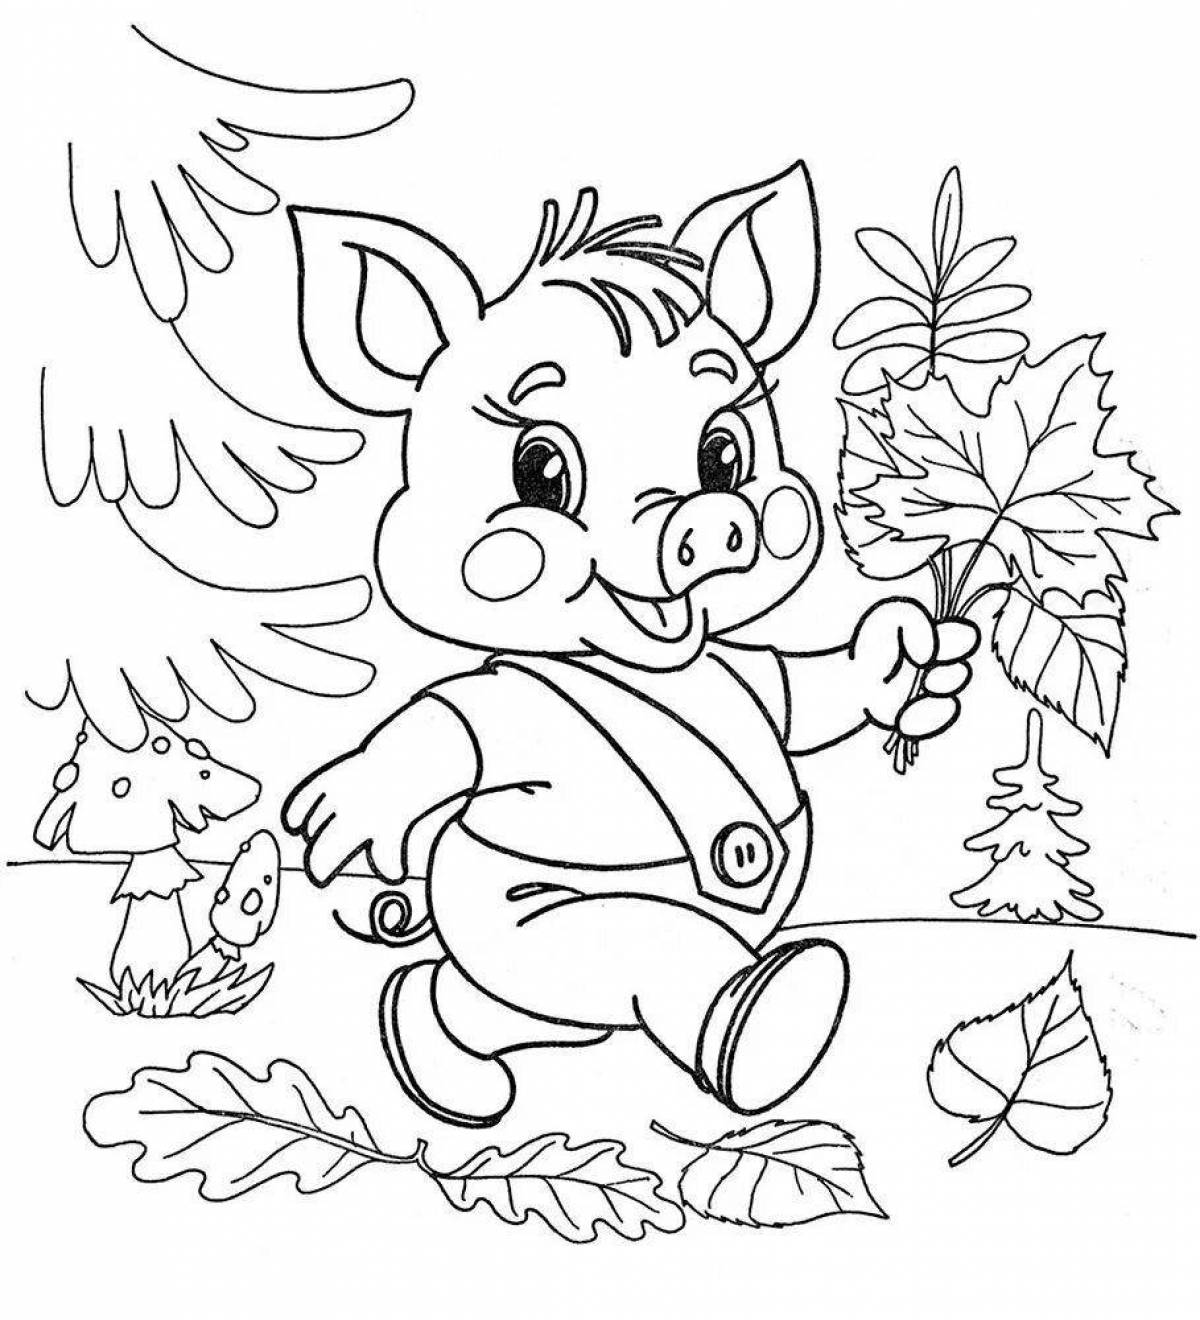 Playful coloring download